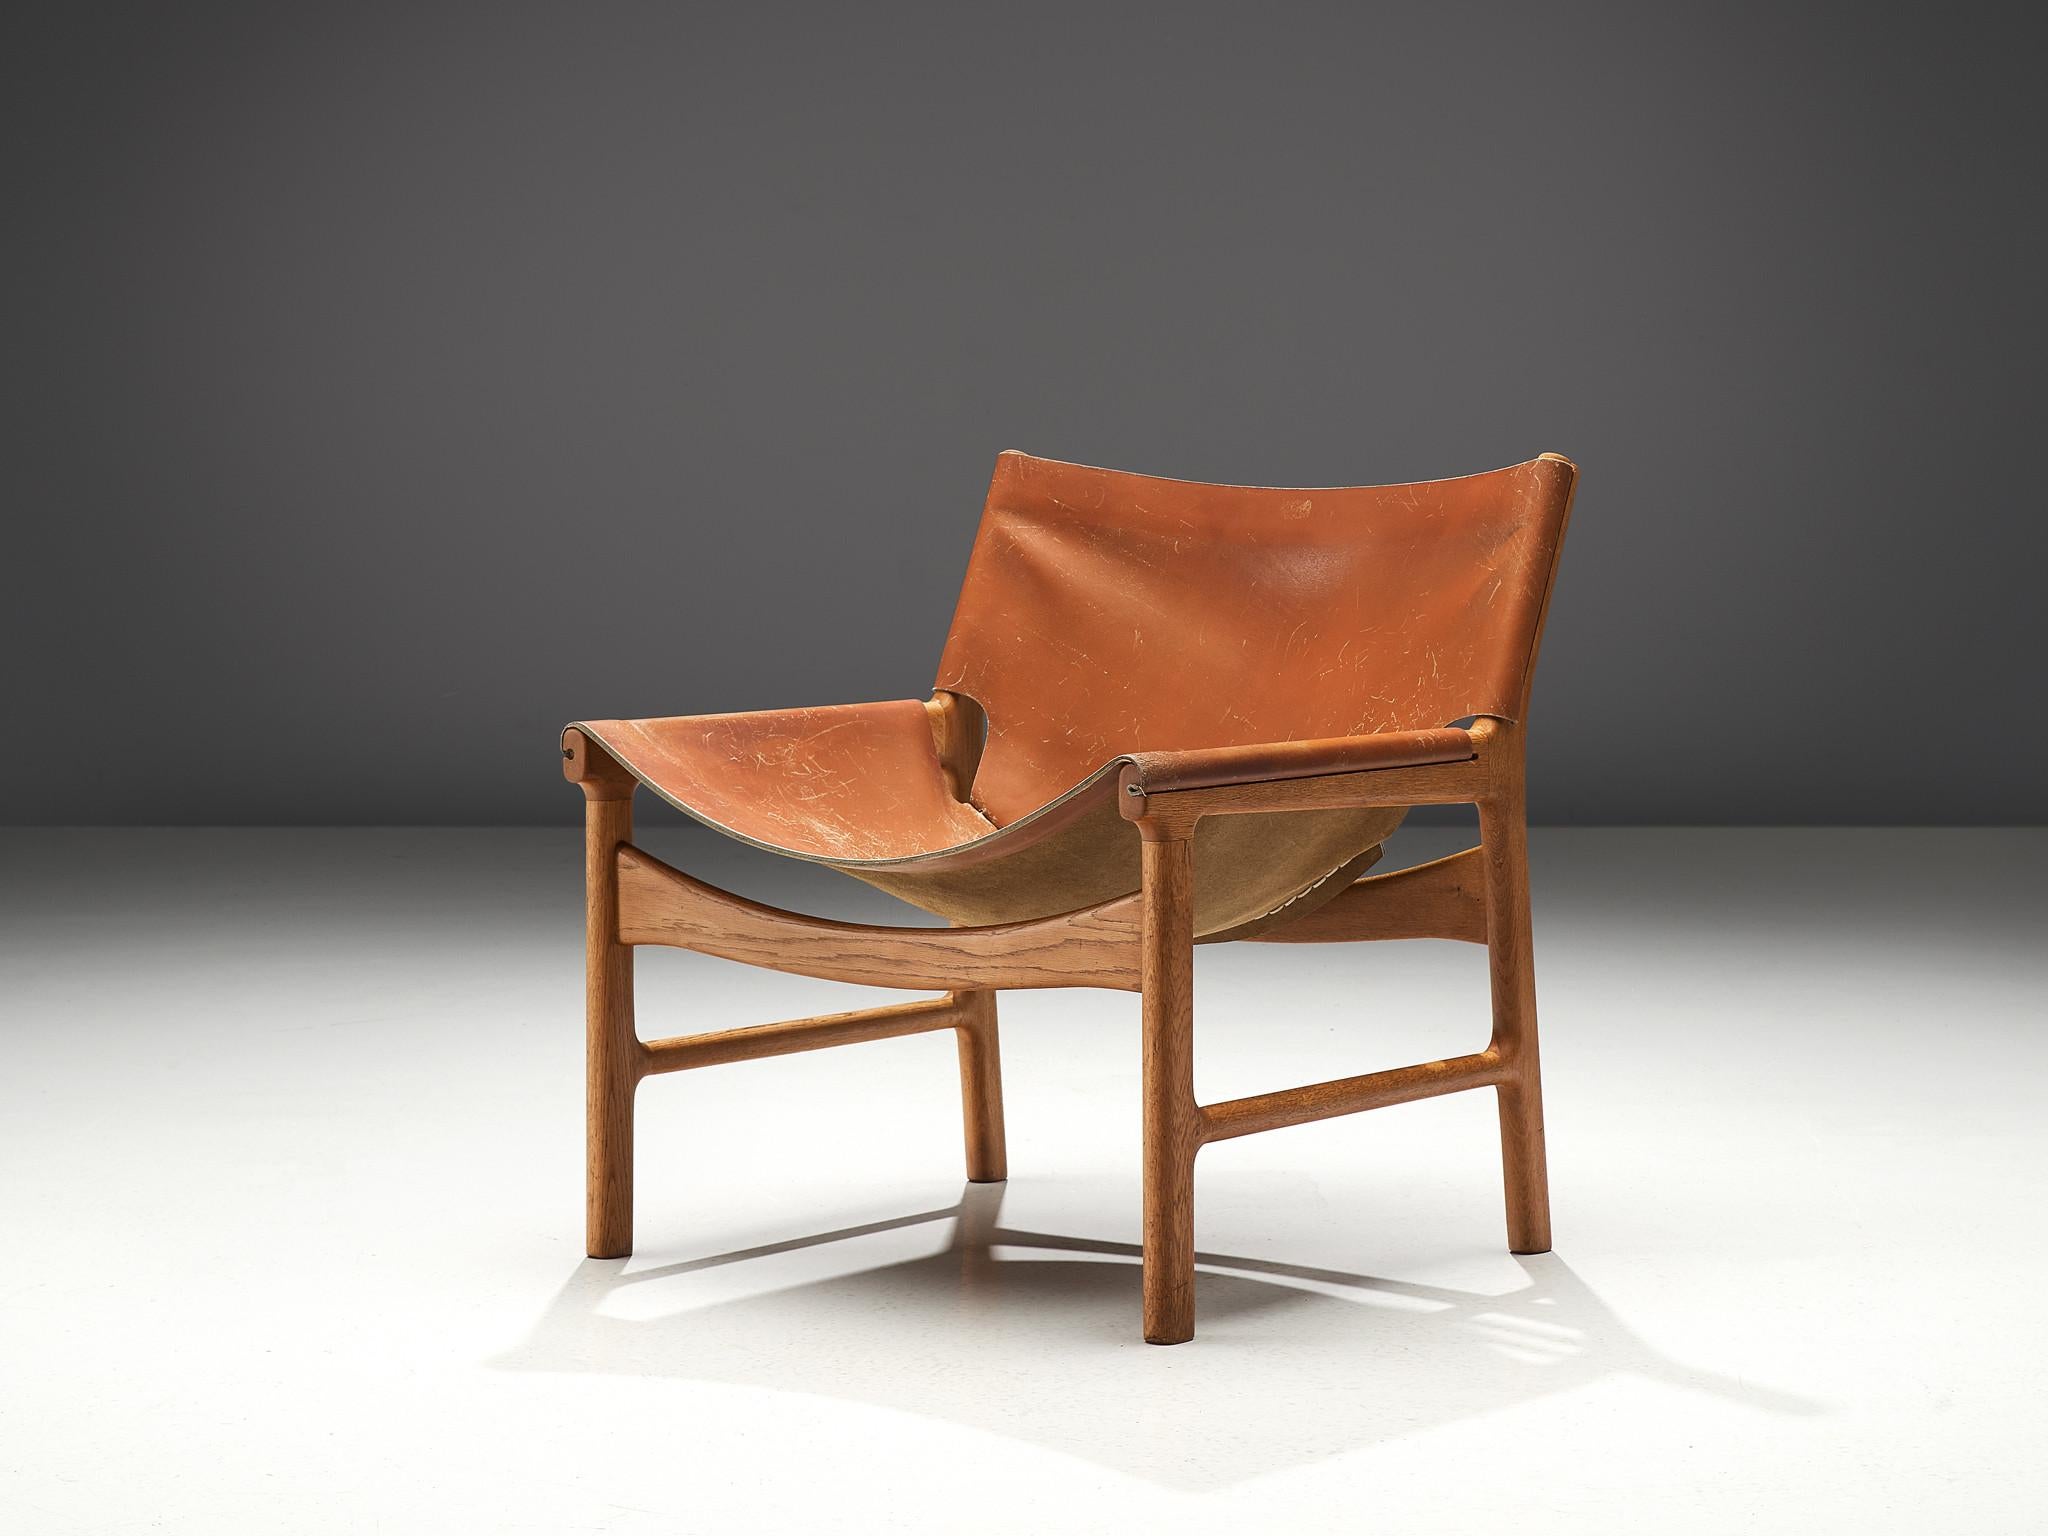 Illum Wikkelsø for Mikael Laursen, easy chair model 103, leather and oak, Denmark, 1960s.

This easy chair is a design by Illum Wikkelsø but produced by master-carver and cabinetmaker Mikael Laursen. The leather is attached to the frame of the